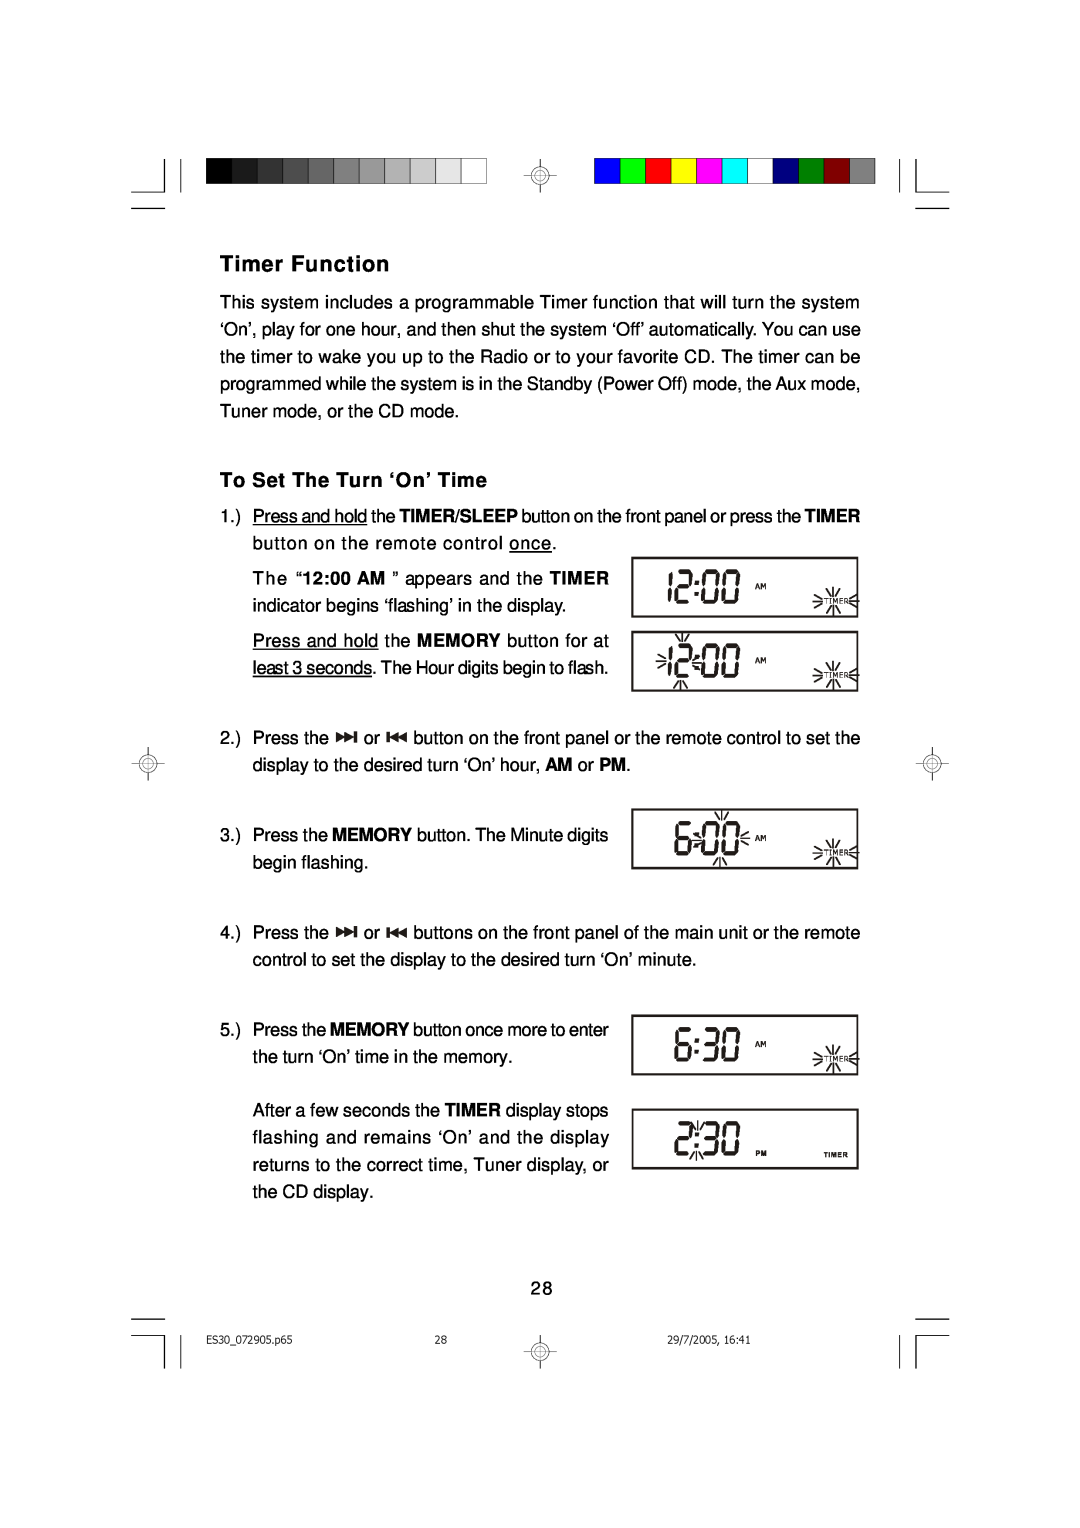 Emerson Process Management ES30 owner manual Timer Function, To Set The Turn ‘On’ Time 